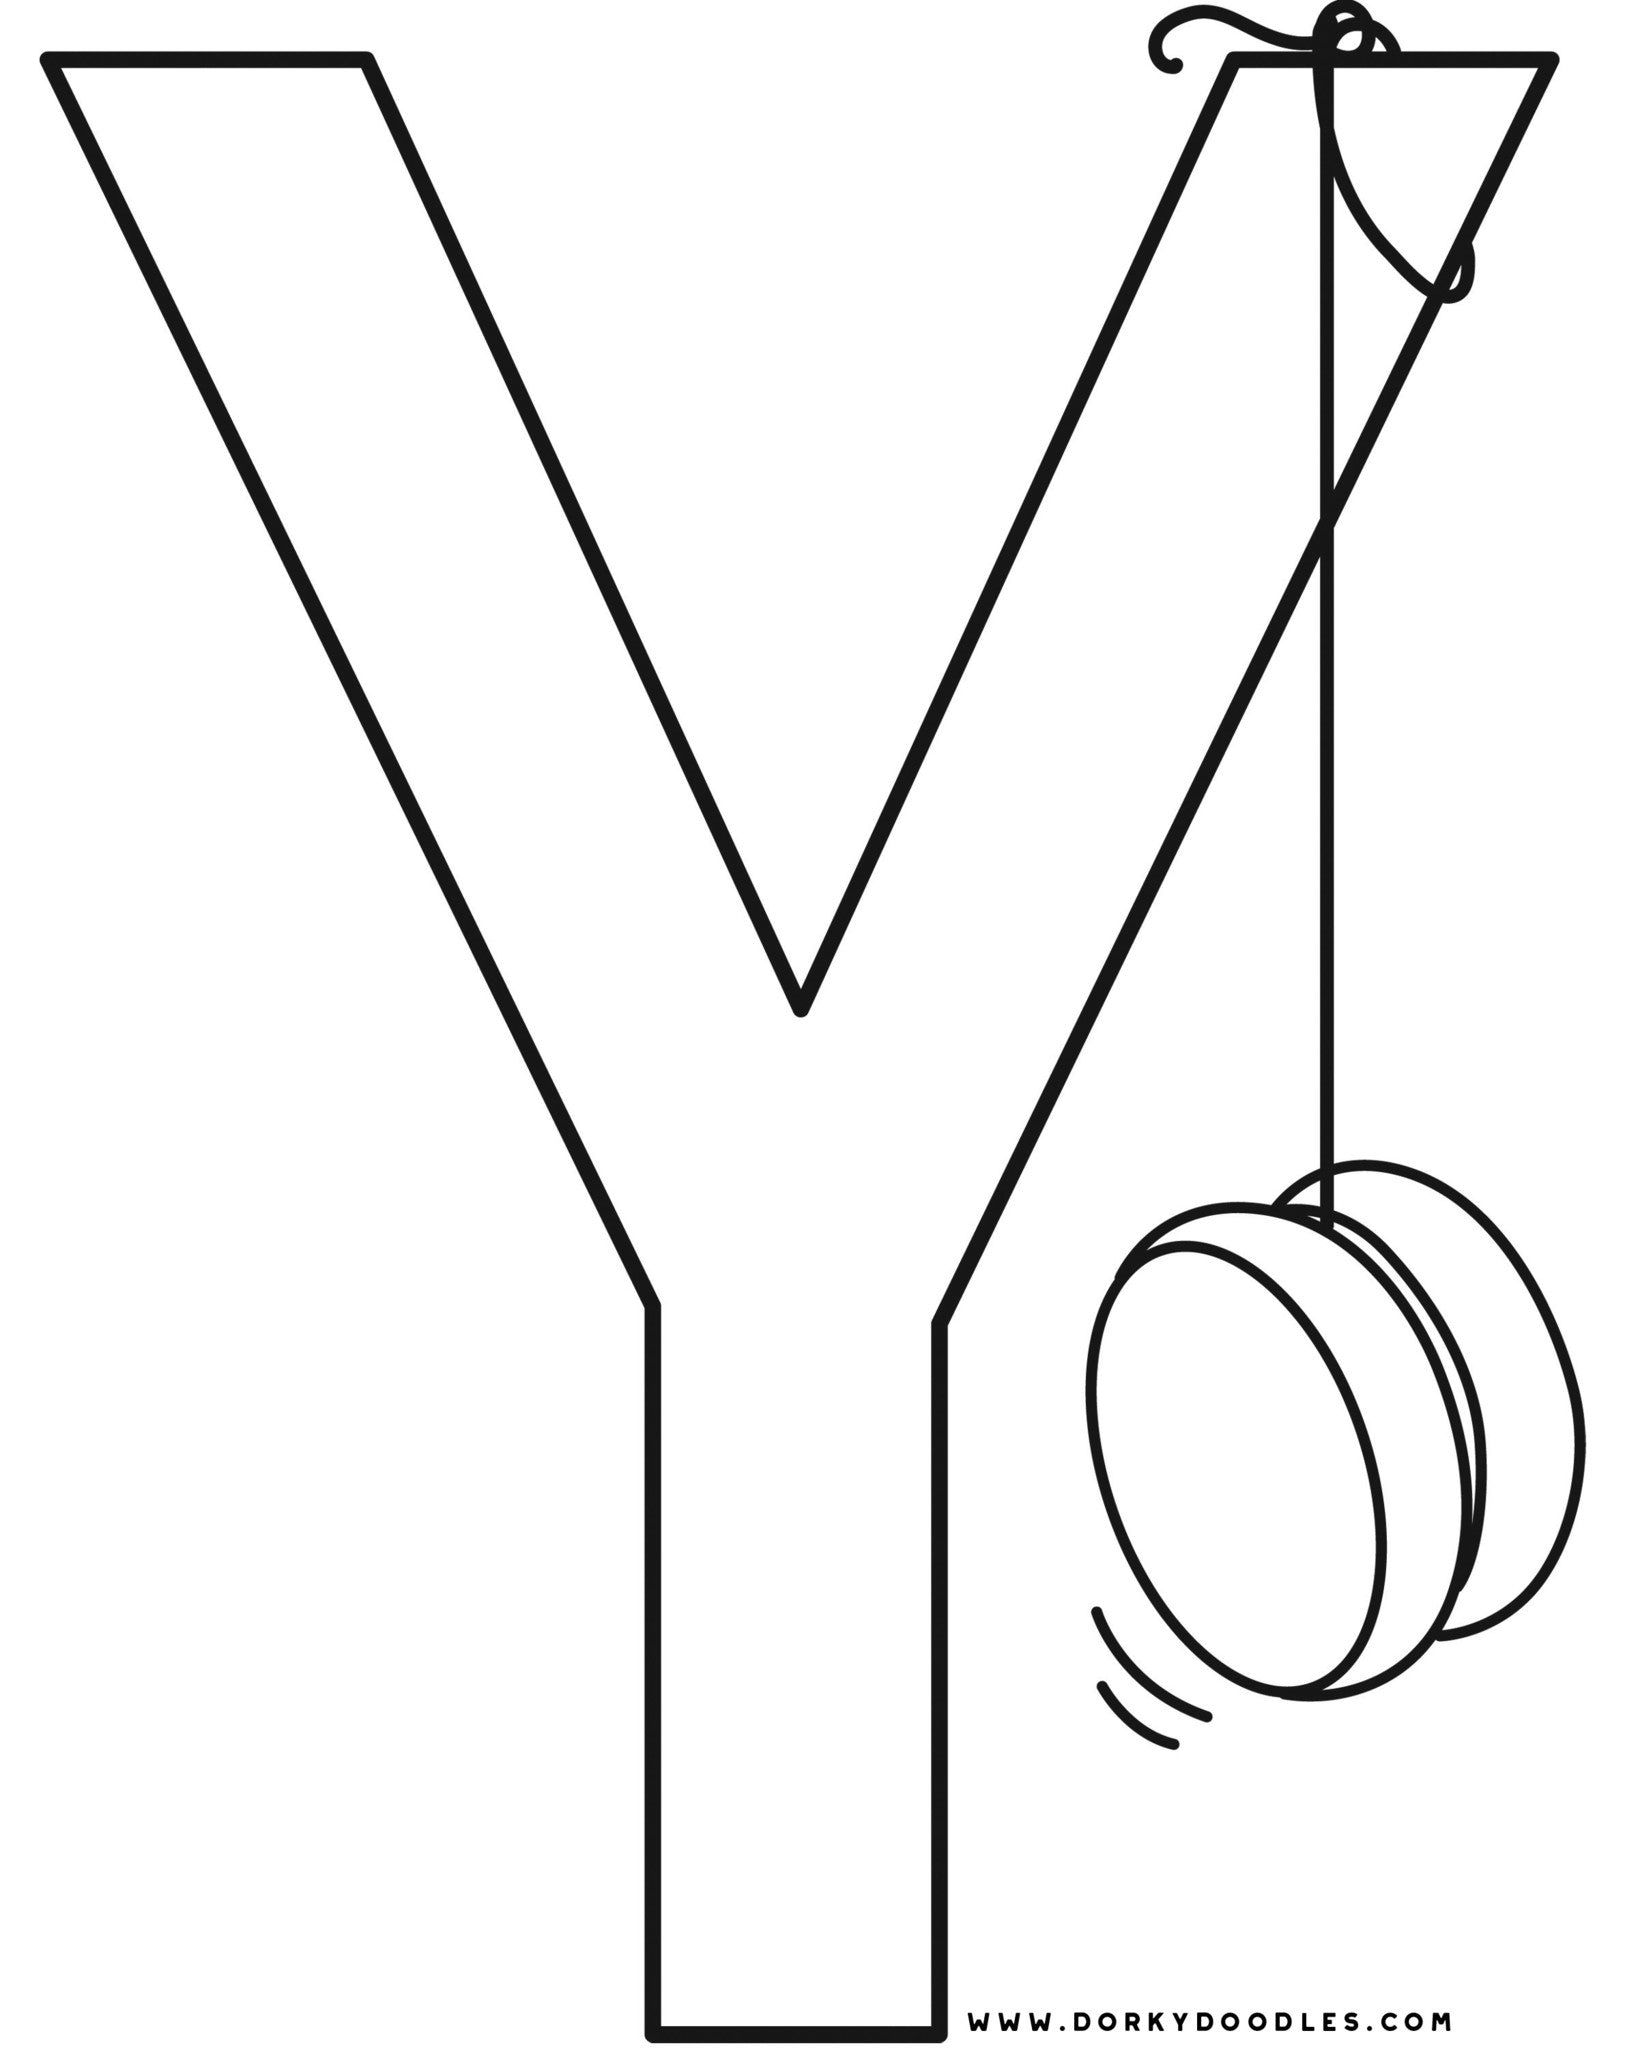 Download Letter Y Writing Practice and Coloring Page Printables - Dorky Doodles